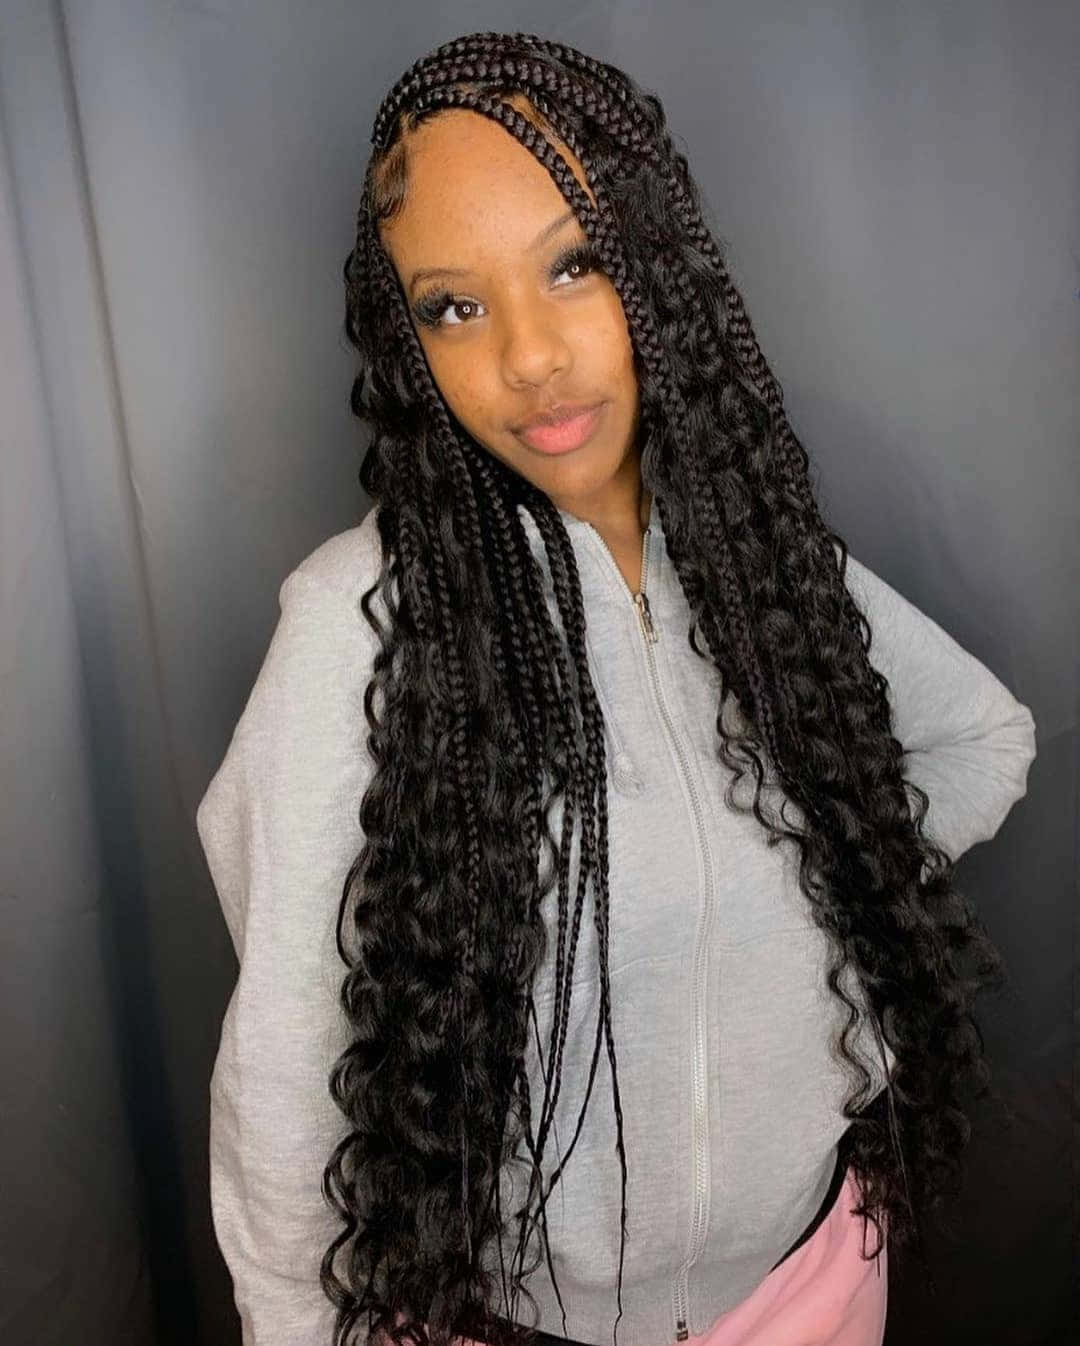 A Woman With Long Braids Posing For A Photo